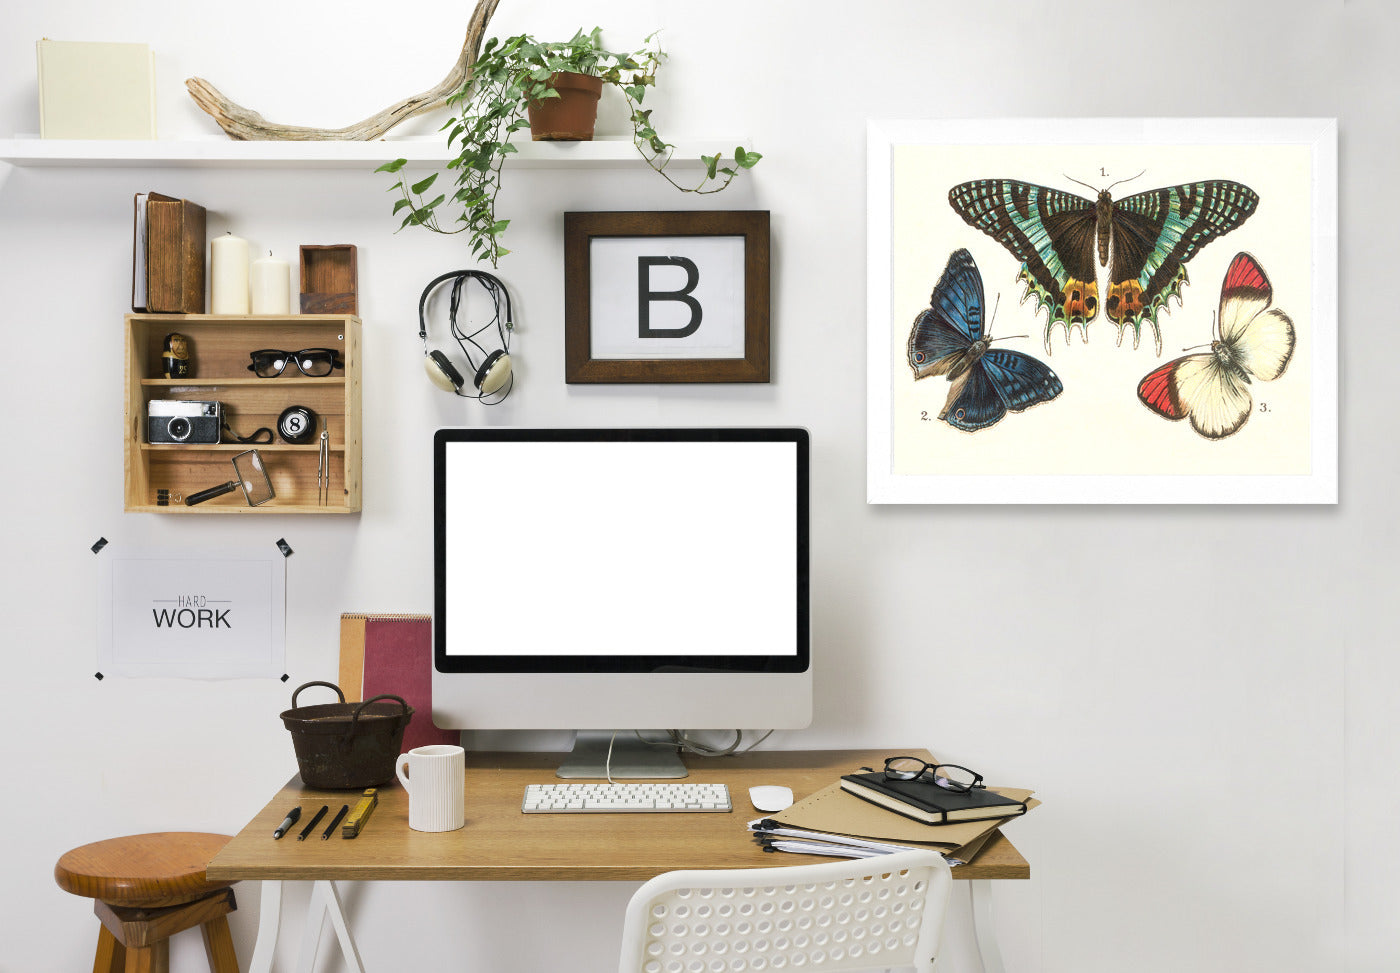 Three Butterflies by Found Image Press Framed Print - Americanflat